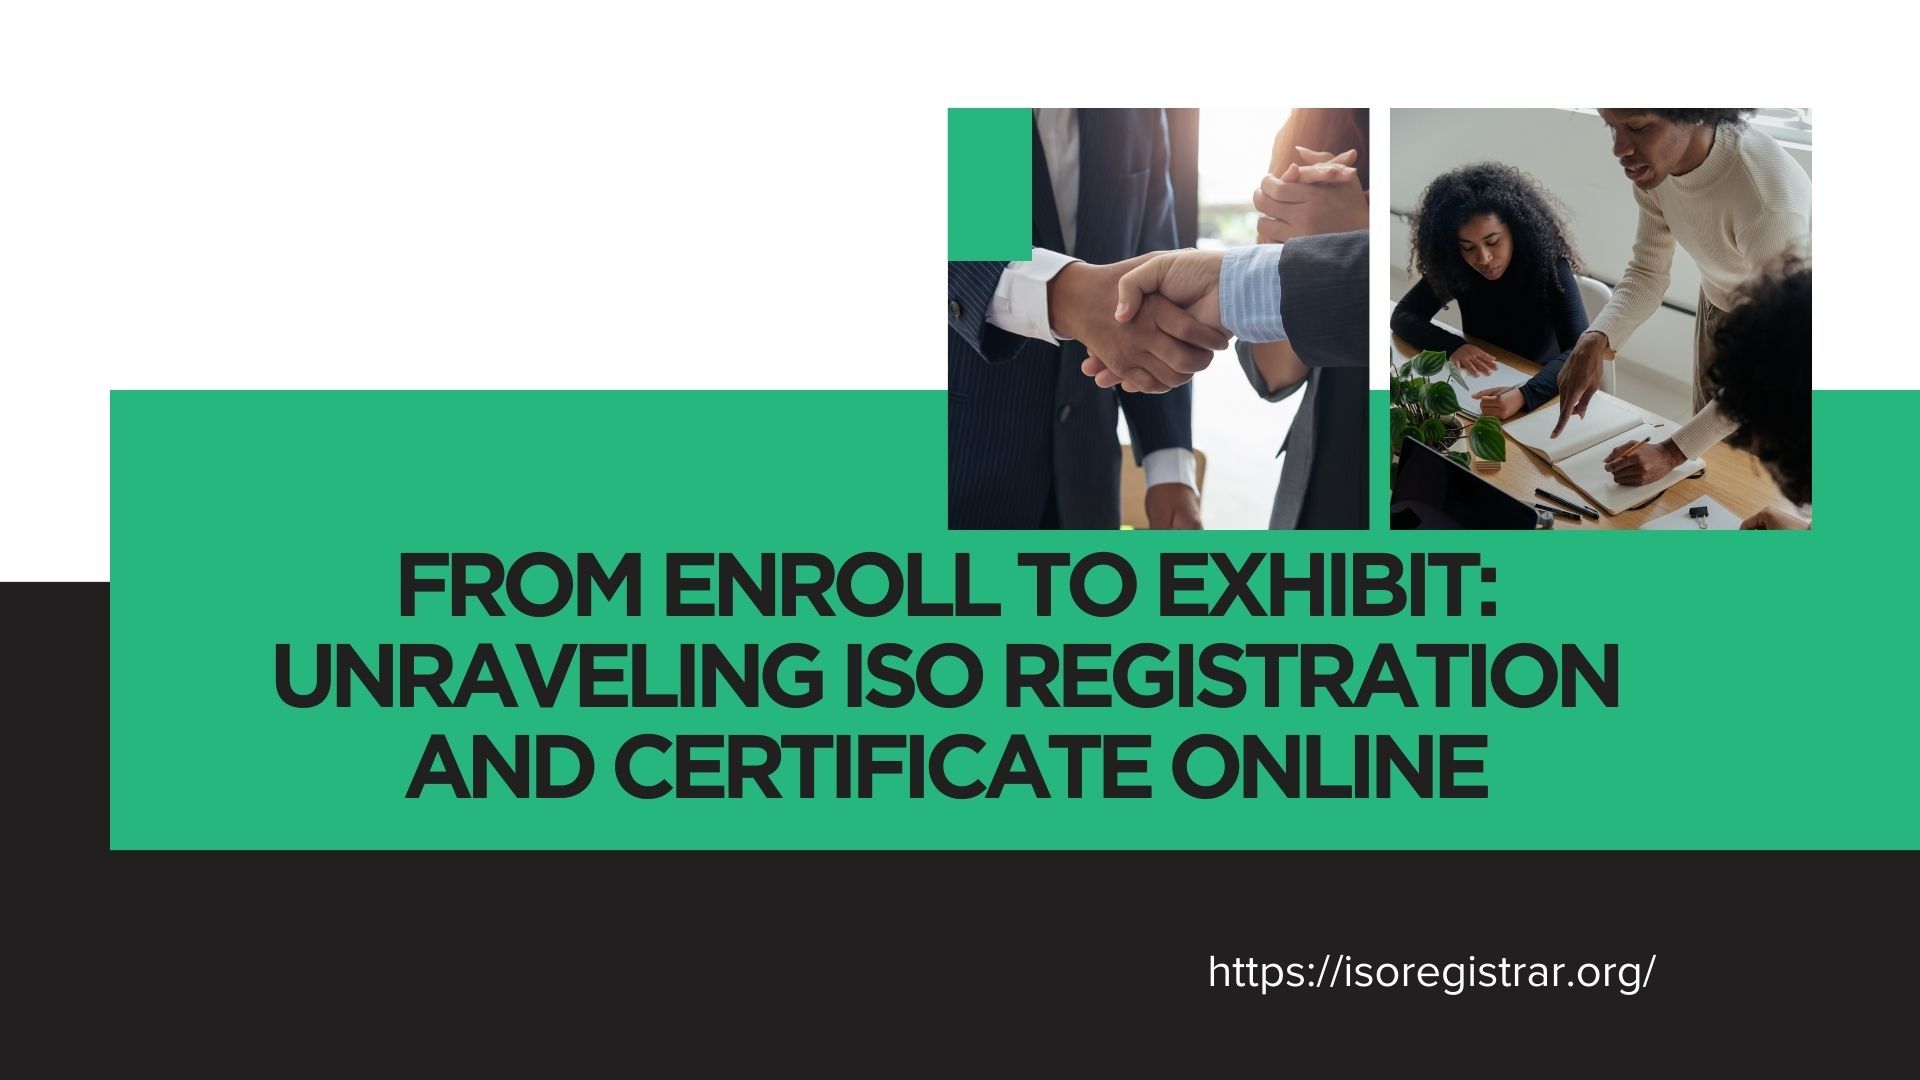 From Enroll to Exhibit: Unraveling ISO Registration and Certificate Online